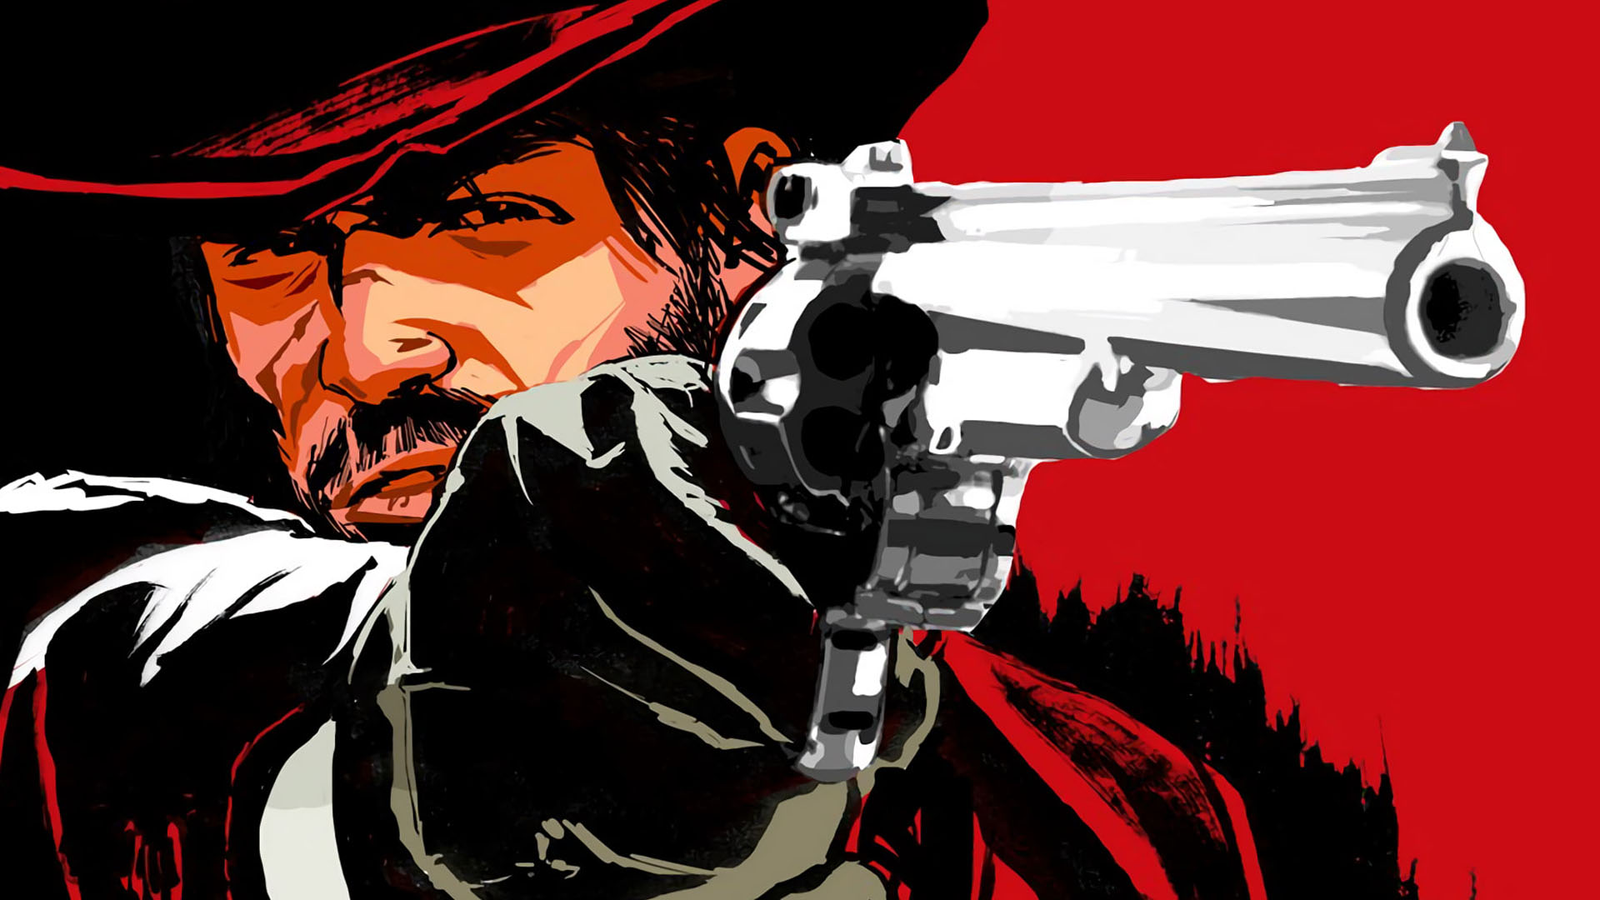 Red Dead Redemption 2: Undead Nightmare 2 trailer is perfection